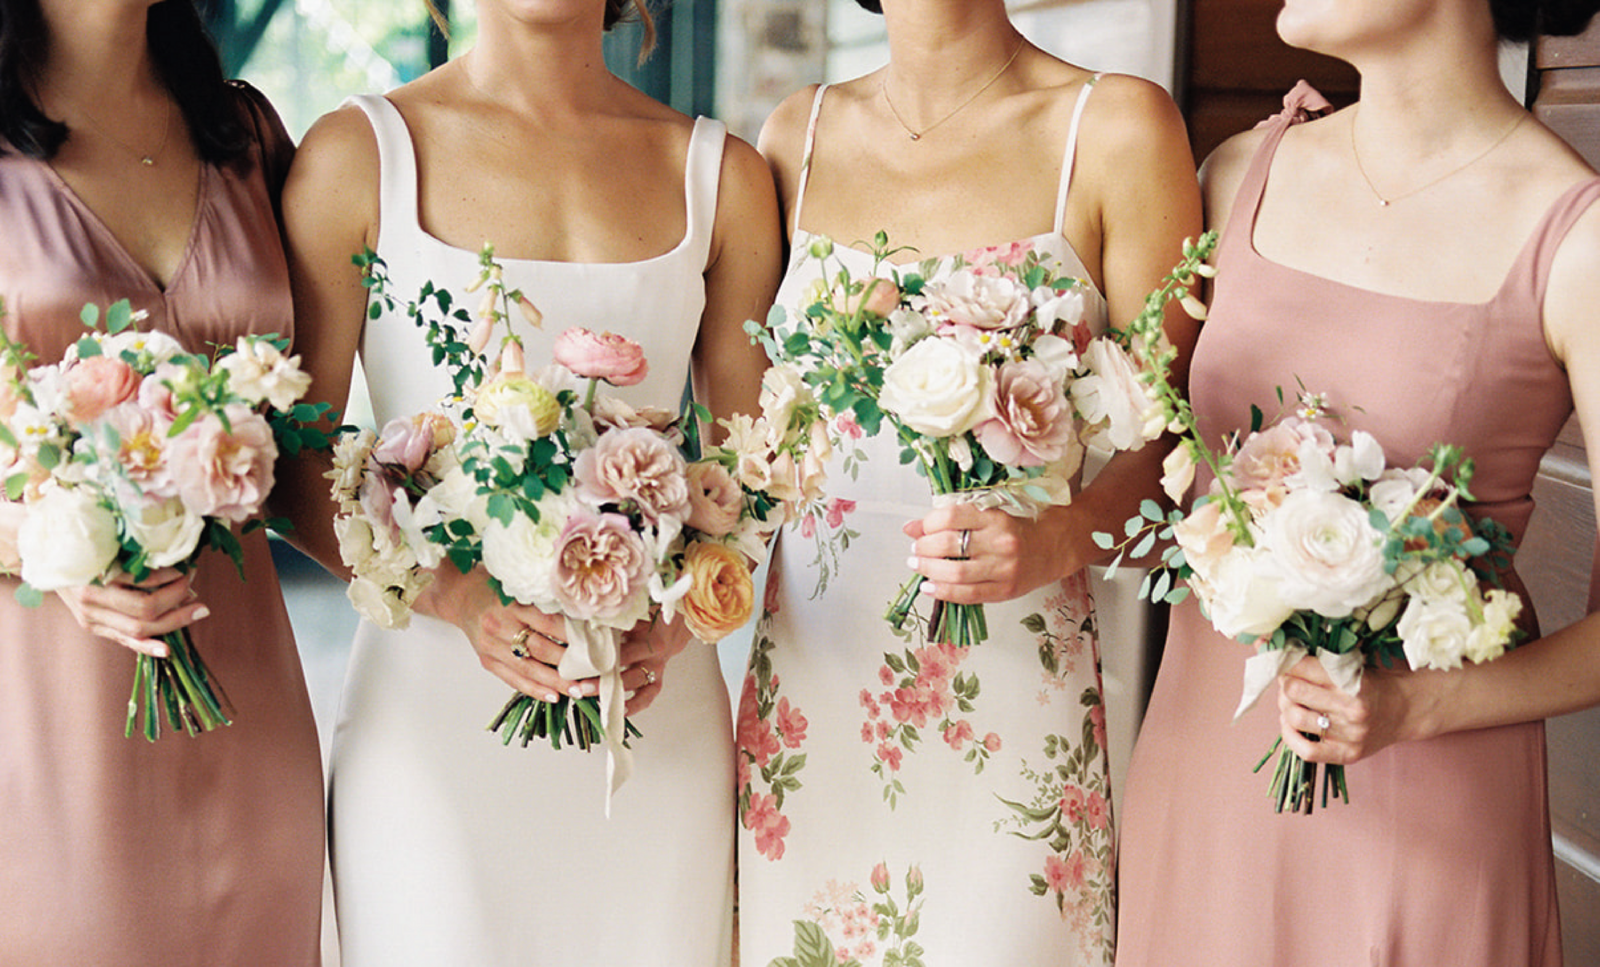 Mix match bridesmaid dresses with floral pattern, blush white apricot and yellow bouquets with light greend